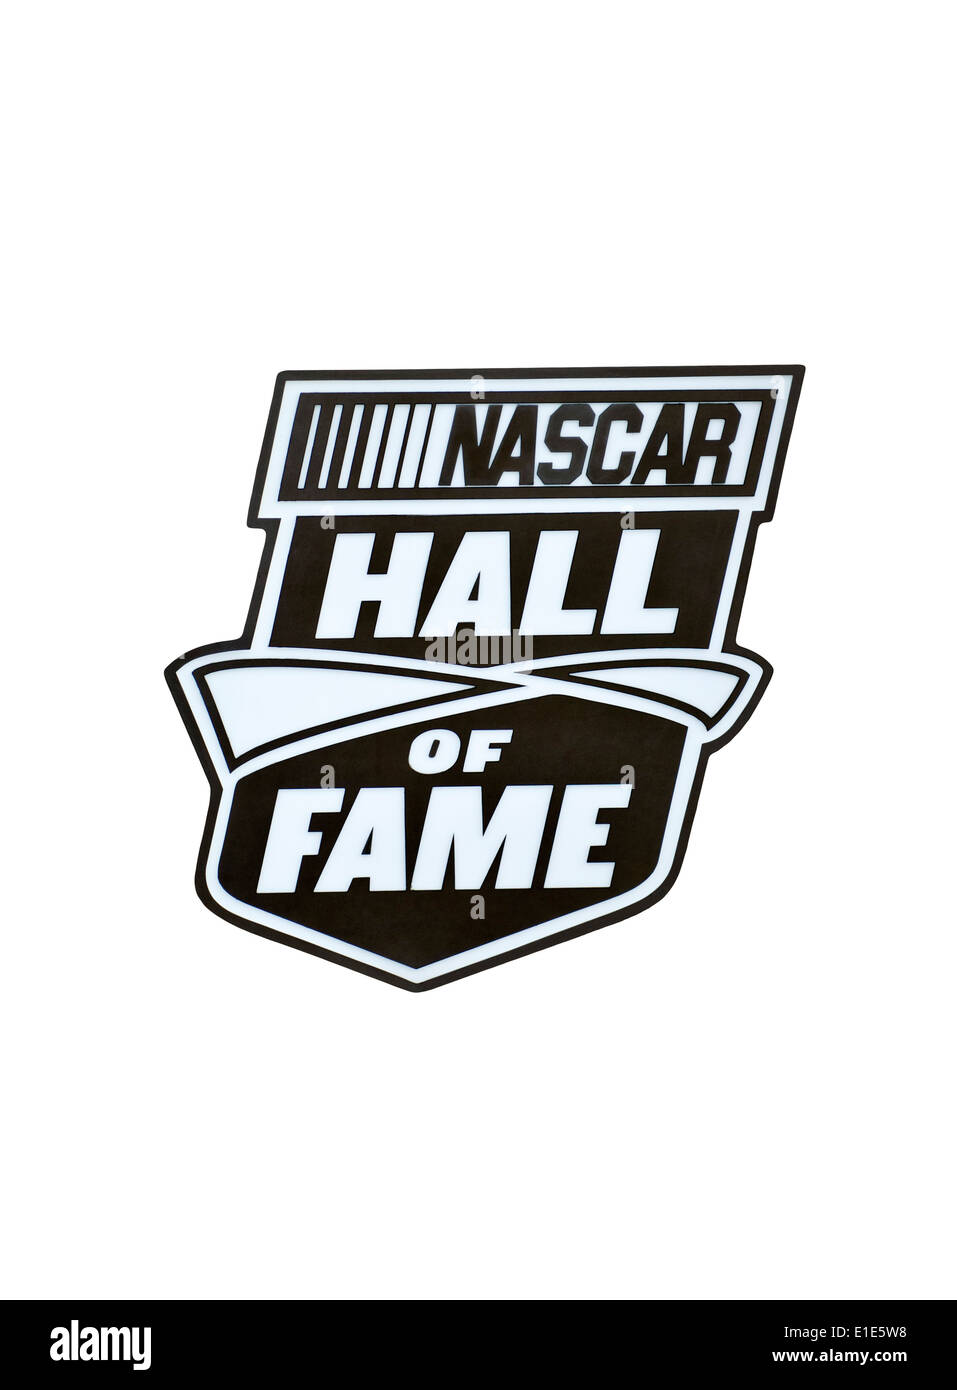 Nascar Hall of Fame Emblem cut-out, from the Nascar Hall of Fame in Charlotte North Carolina Stock Photo